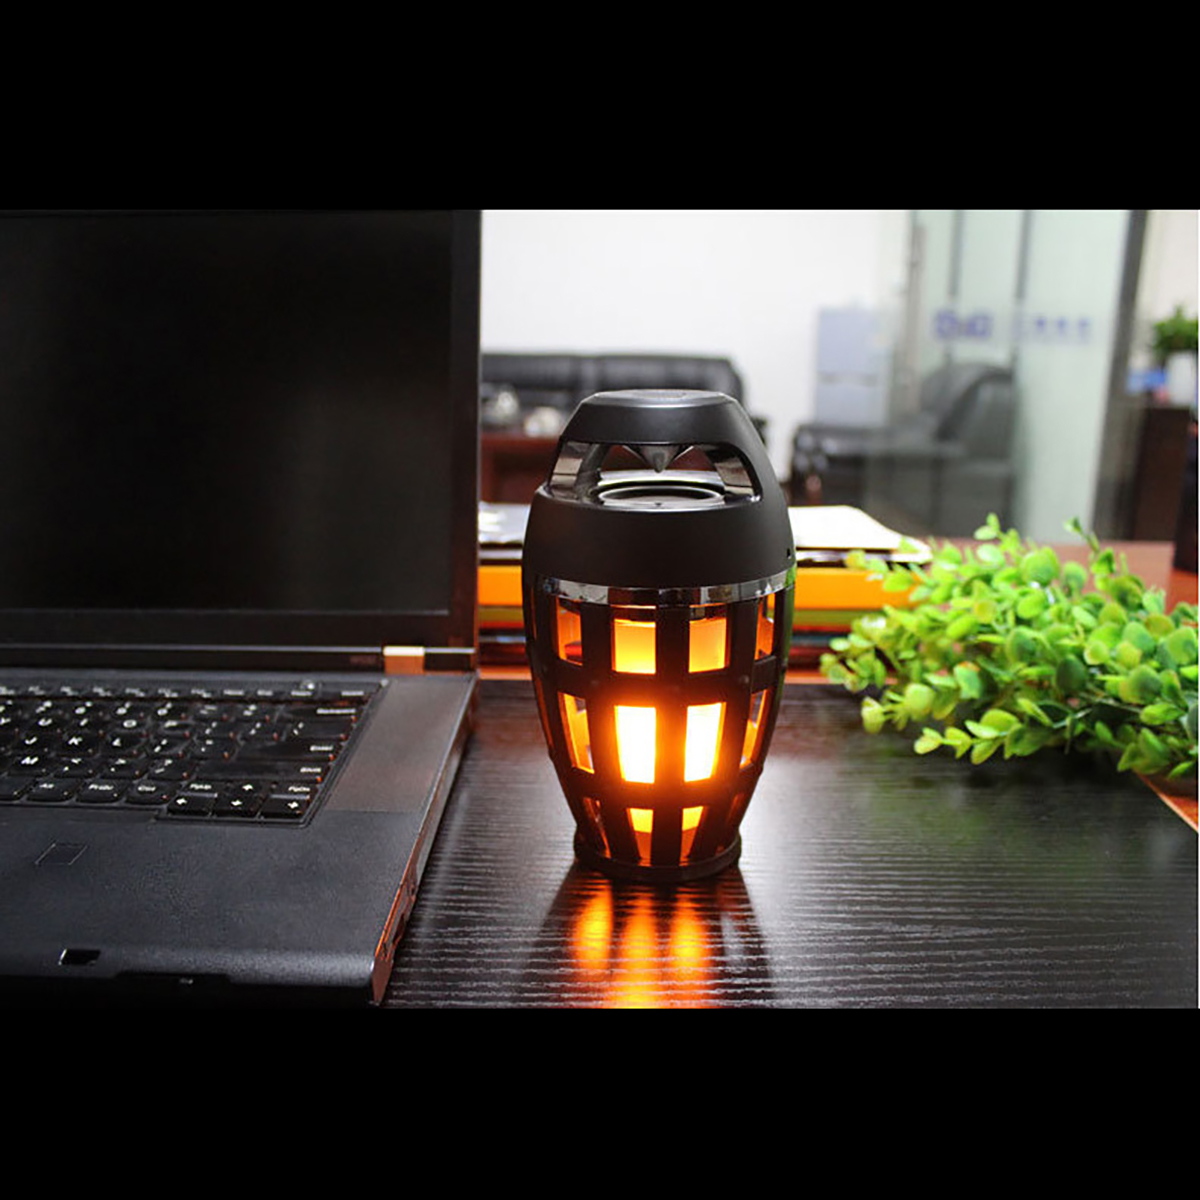 Wireless-bluetooth-Speaker-LED-Flame-Light-Night-Lamp-Portable-Stereo-Speaker-with-Flickers-Warm-Whi-1619613-7